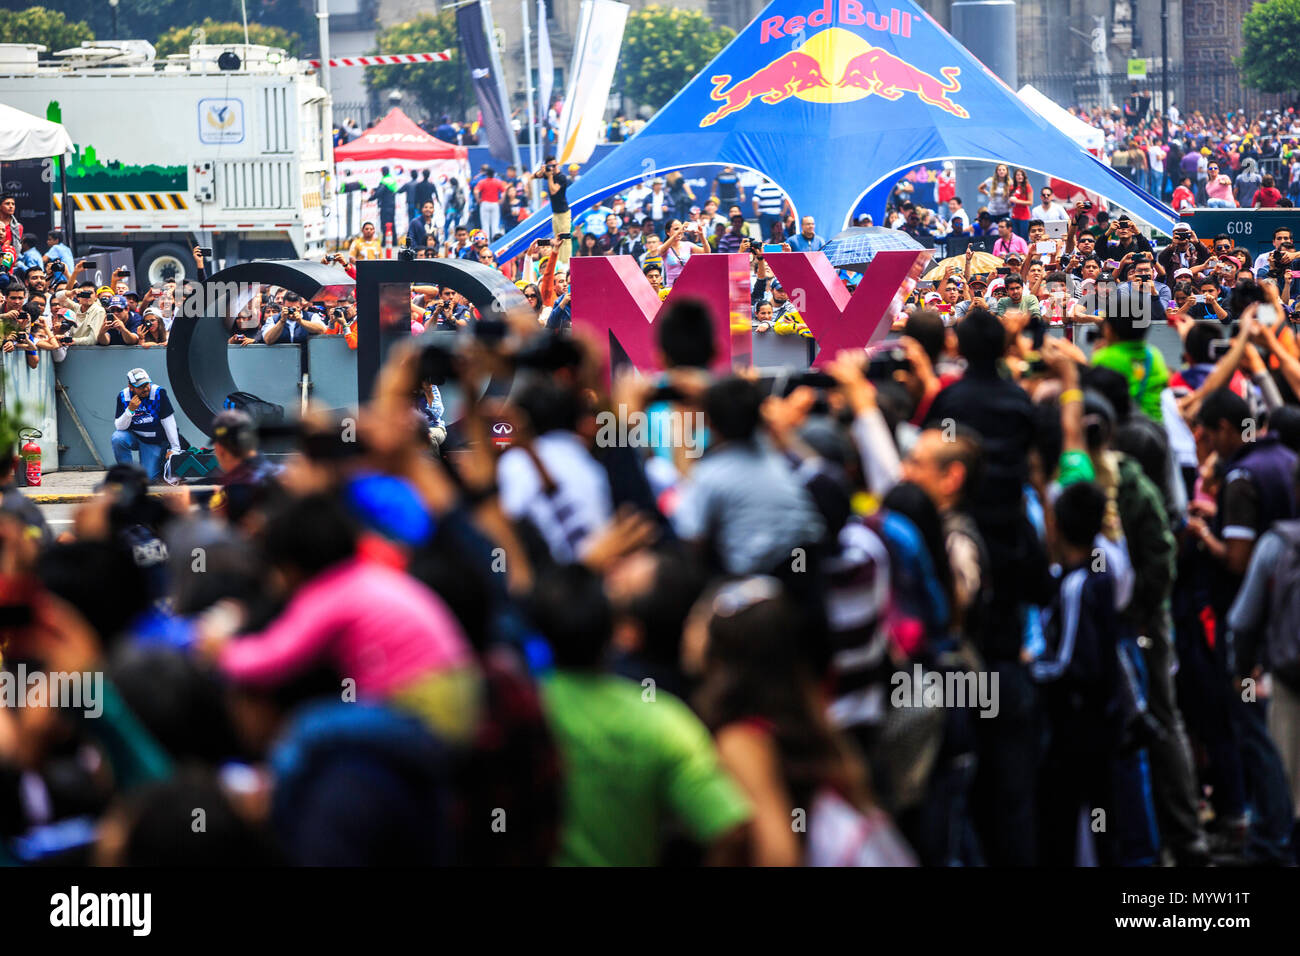 Mexico City, Mexico - June 27, 2015: CD MX logo at background, at the Infiniti Red Bull Racing F1 Showrun. Stock Photo